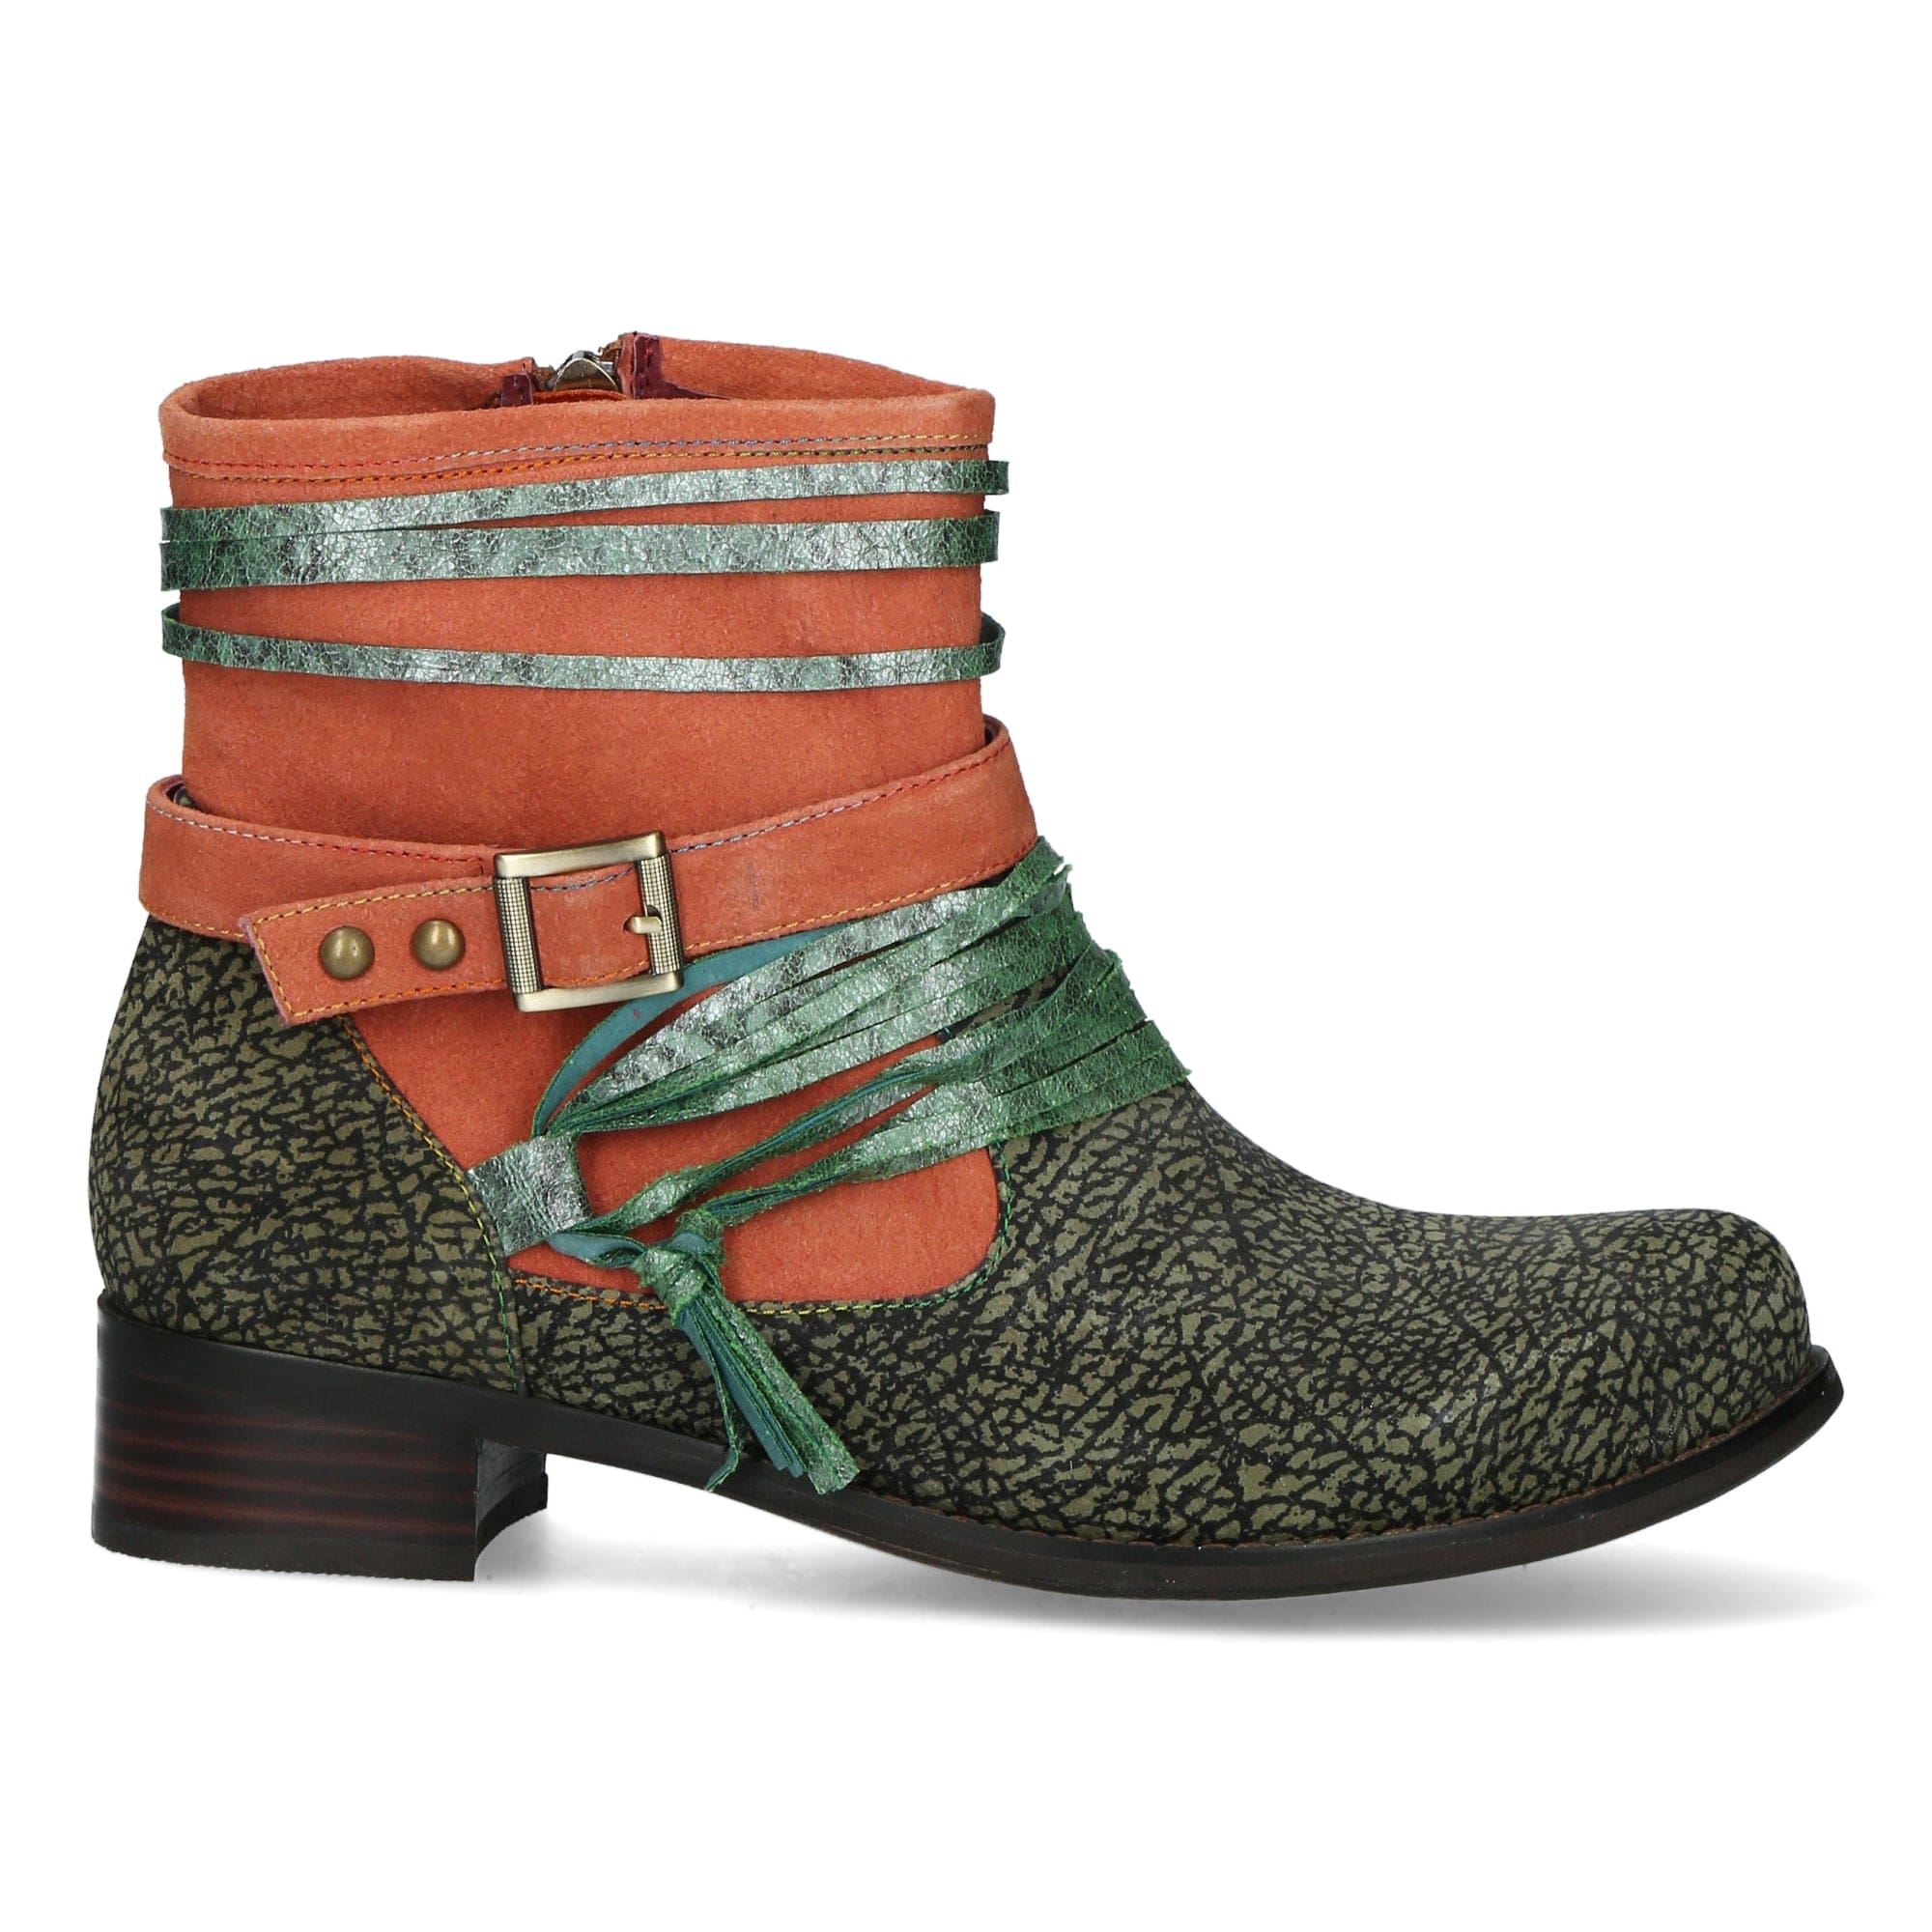 Chaussures COLOMBE 02 - 35 / Menthe - Boots